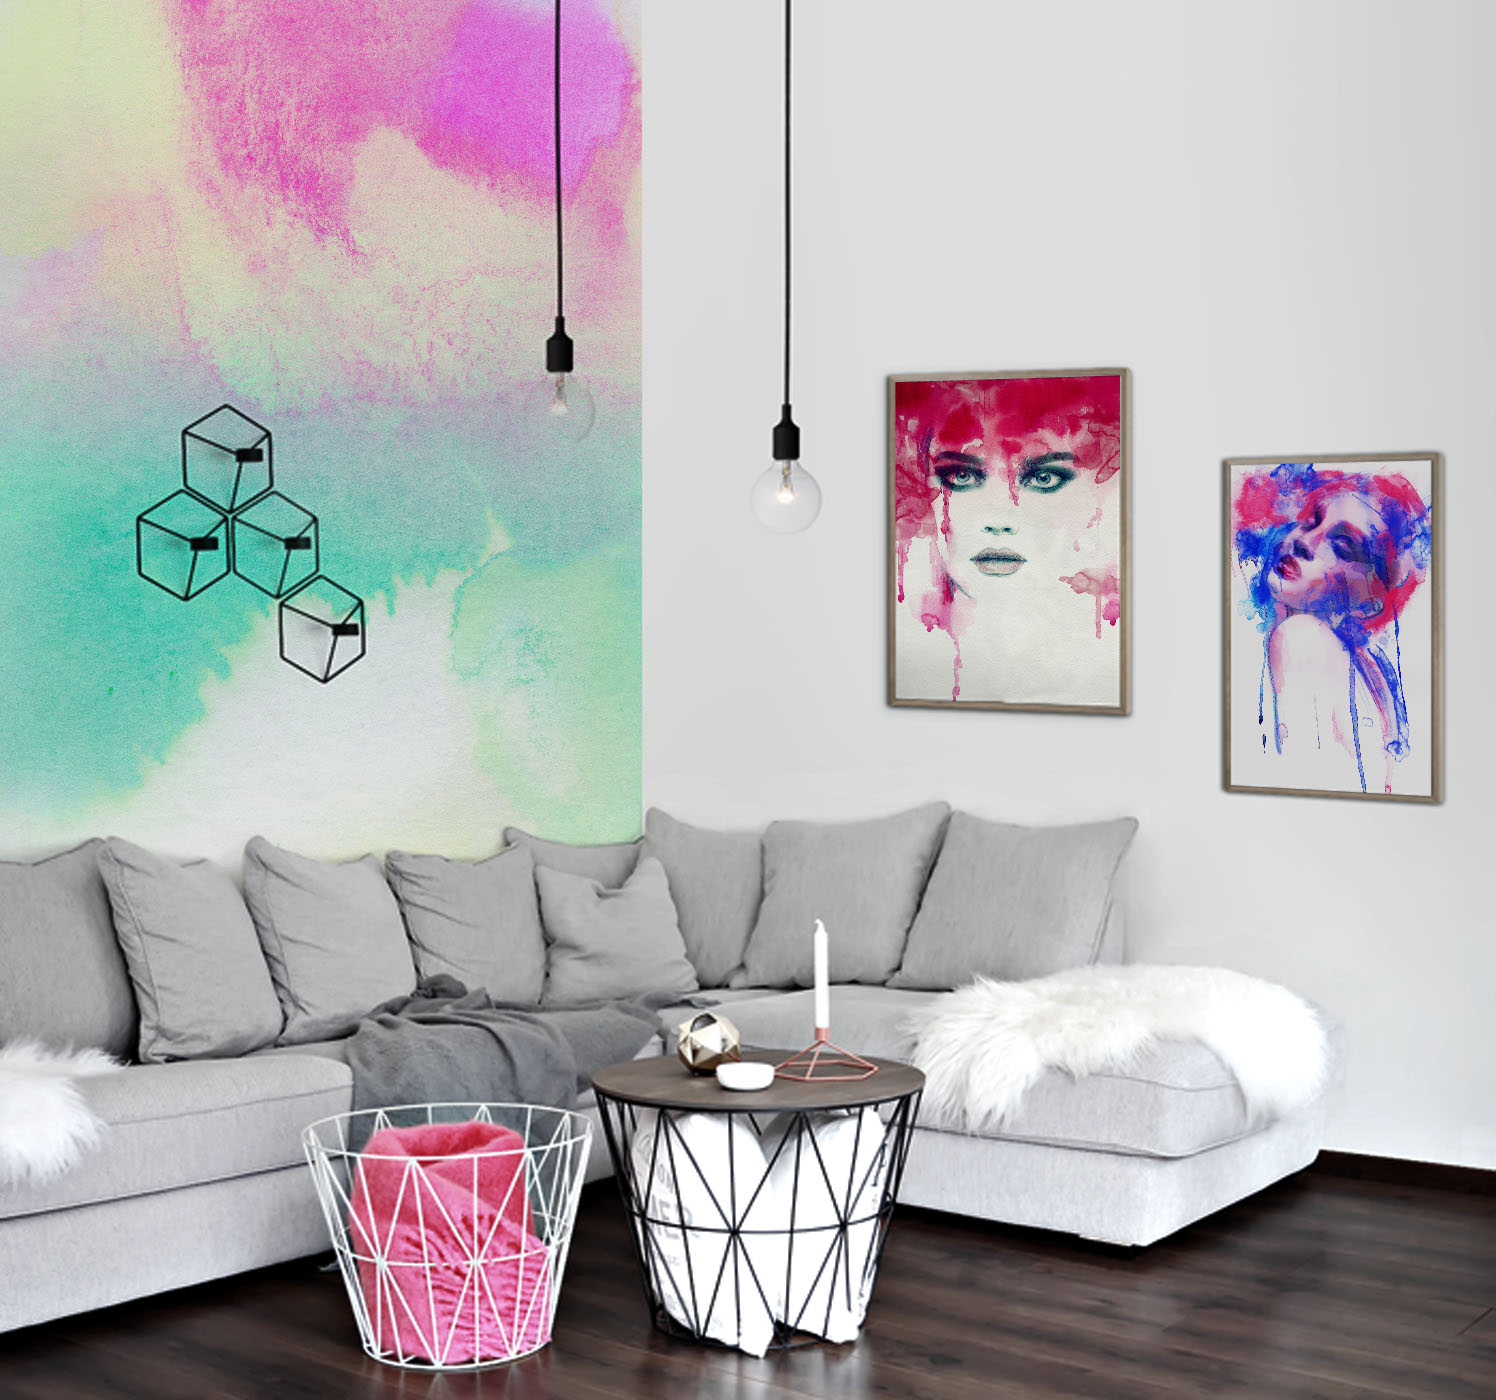 Watercolor Stains • Living room - Contemporary - Abstraction - People - Wall Murals - Prints